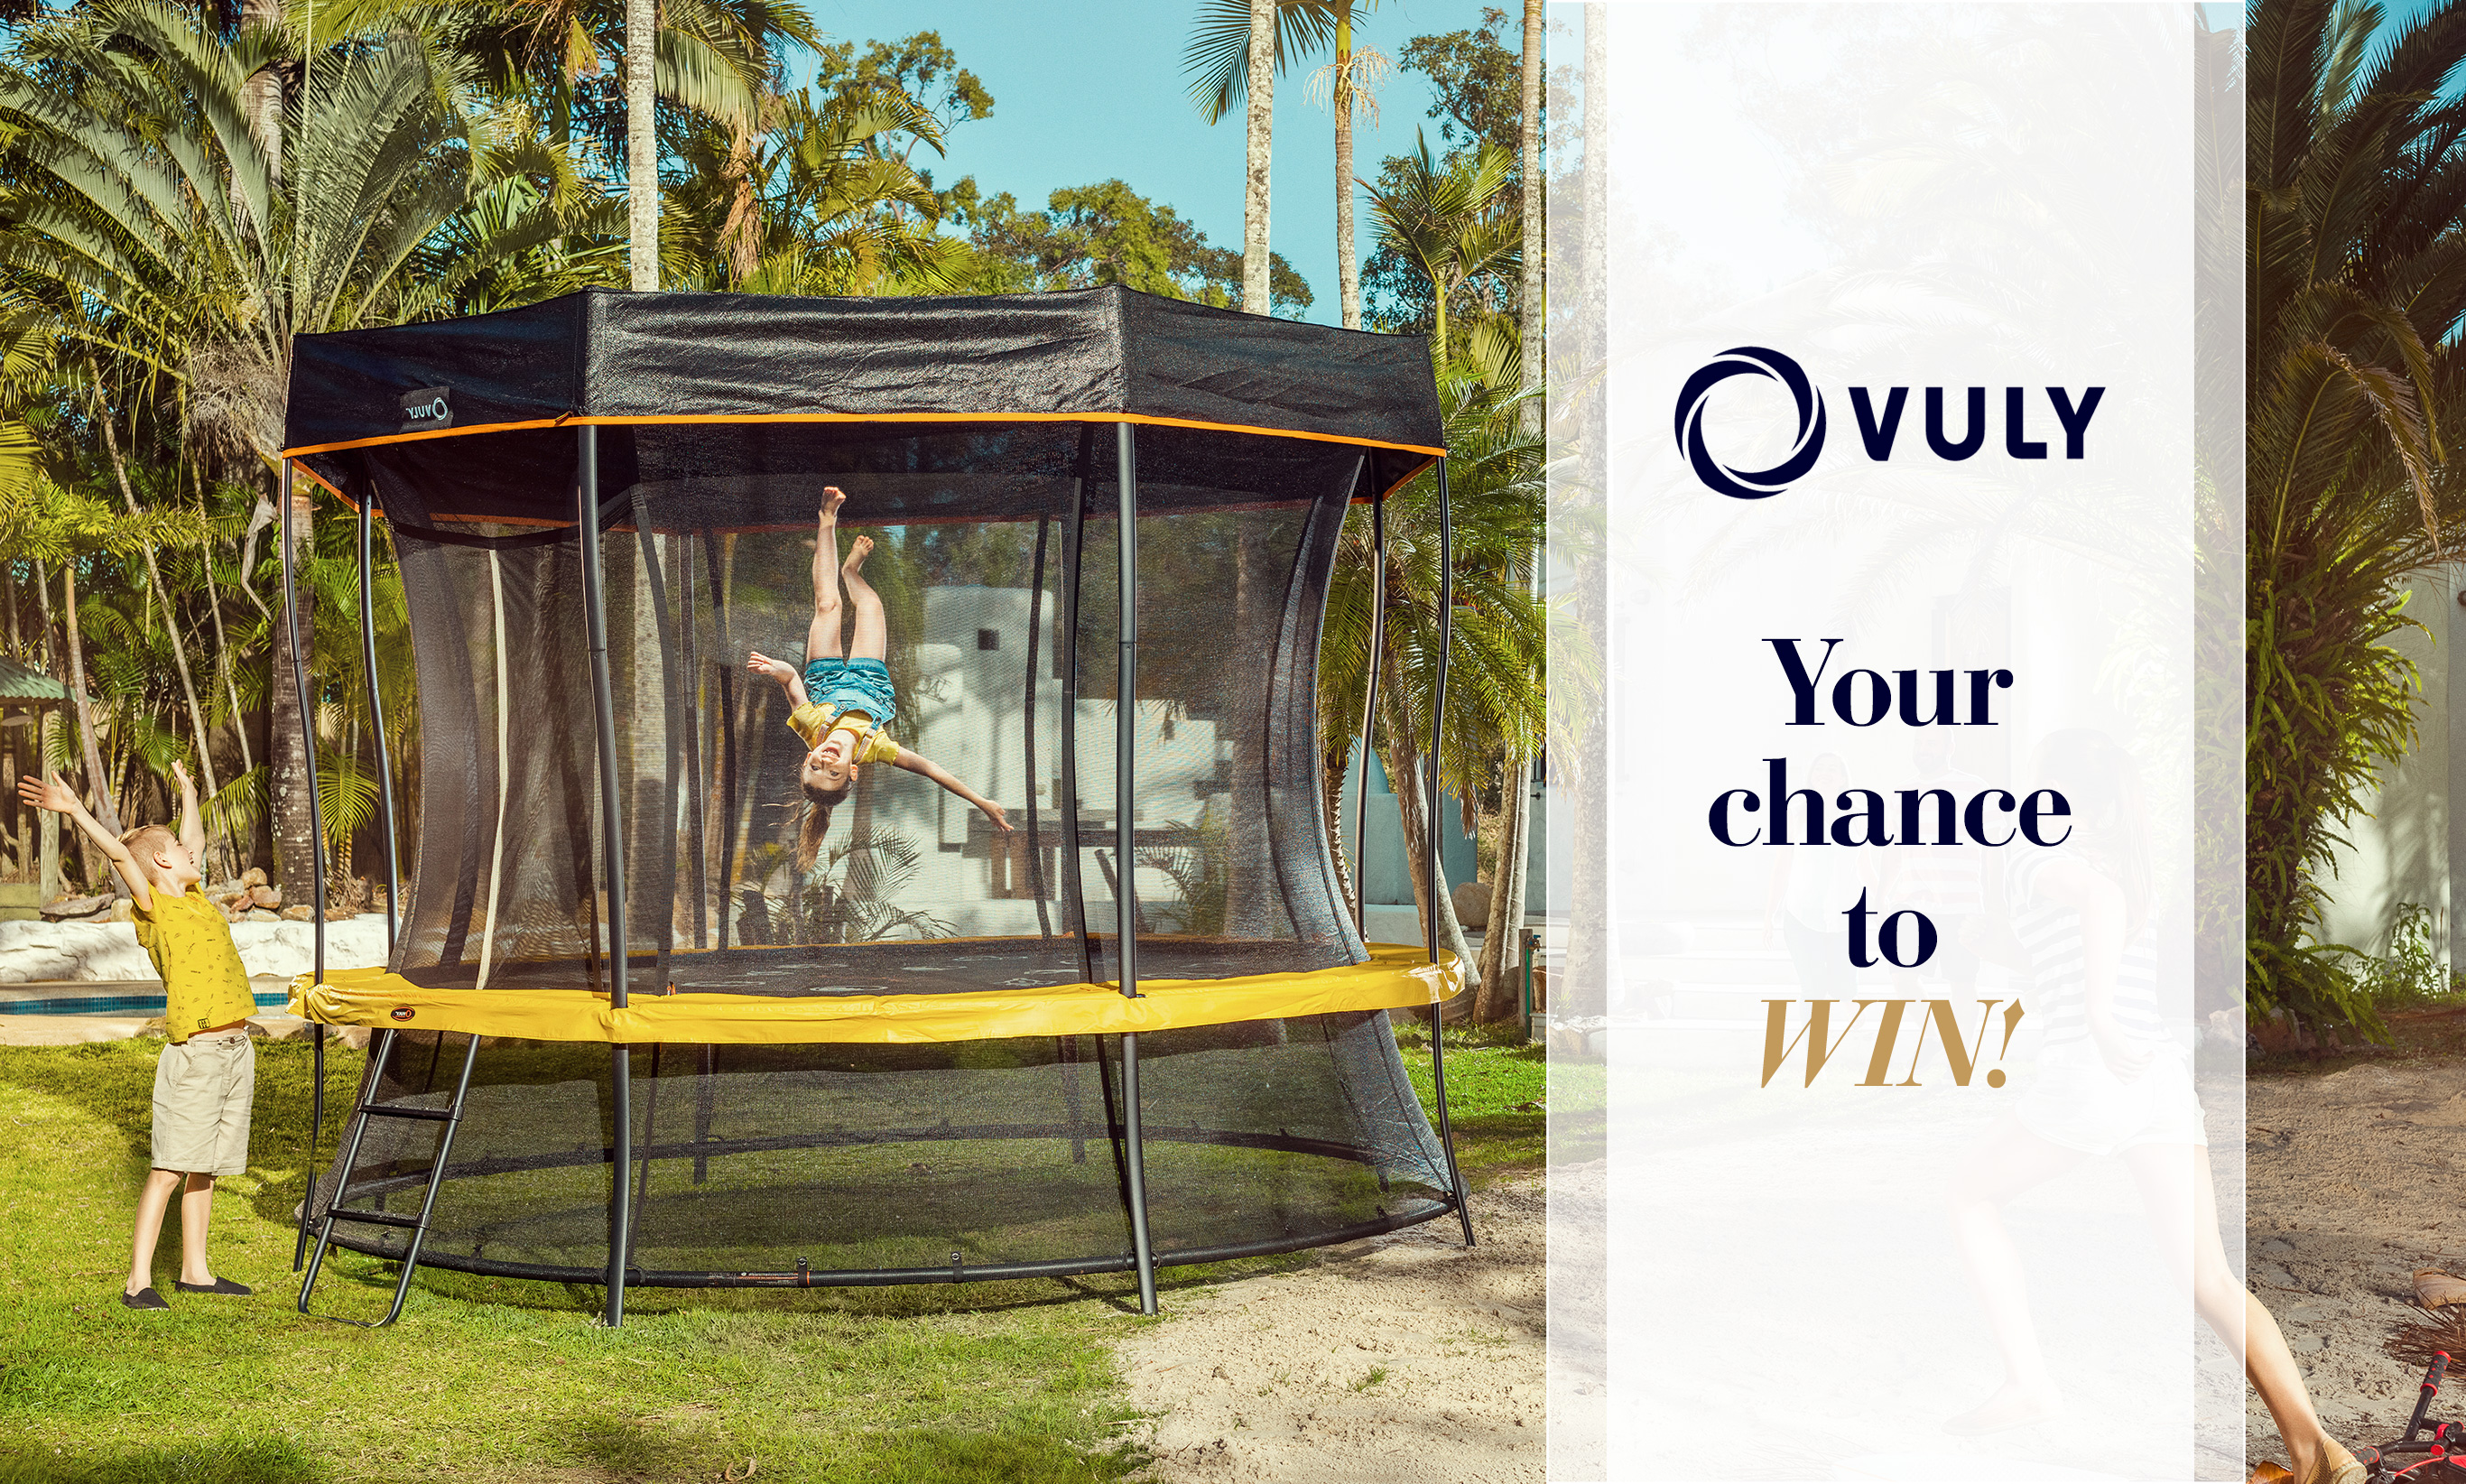 Follow this link to enter our awesome VULY competition for your chance to win a VULY Trampoline!